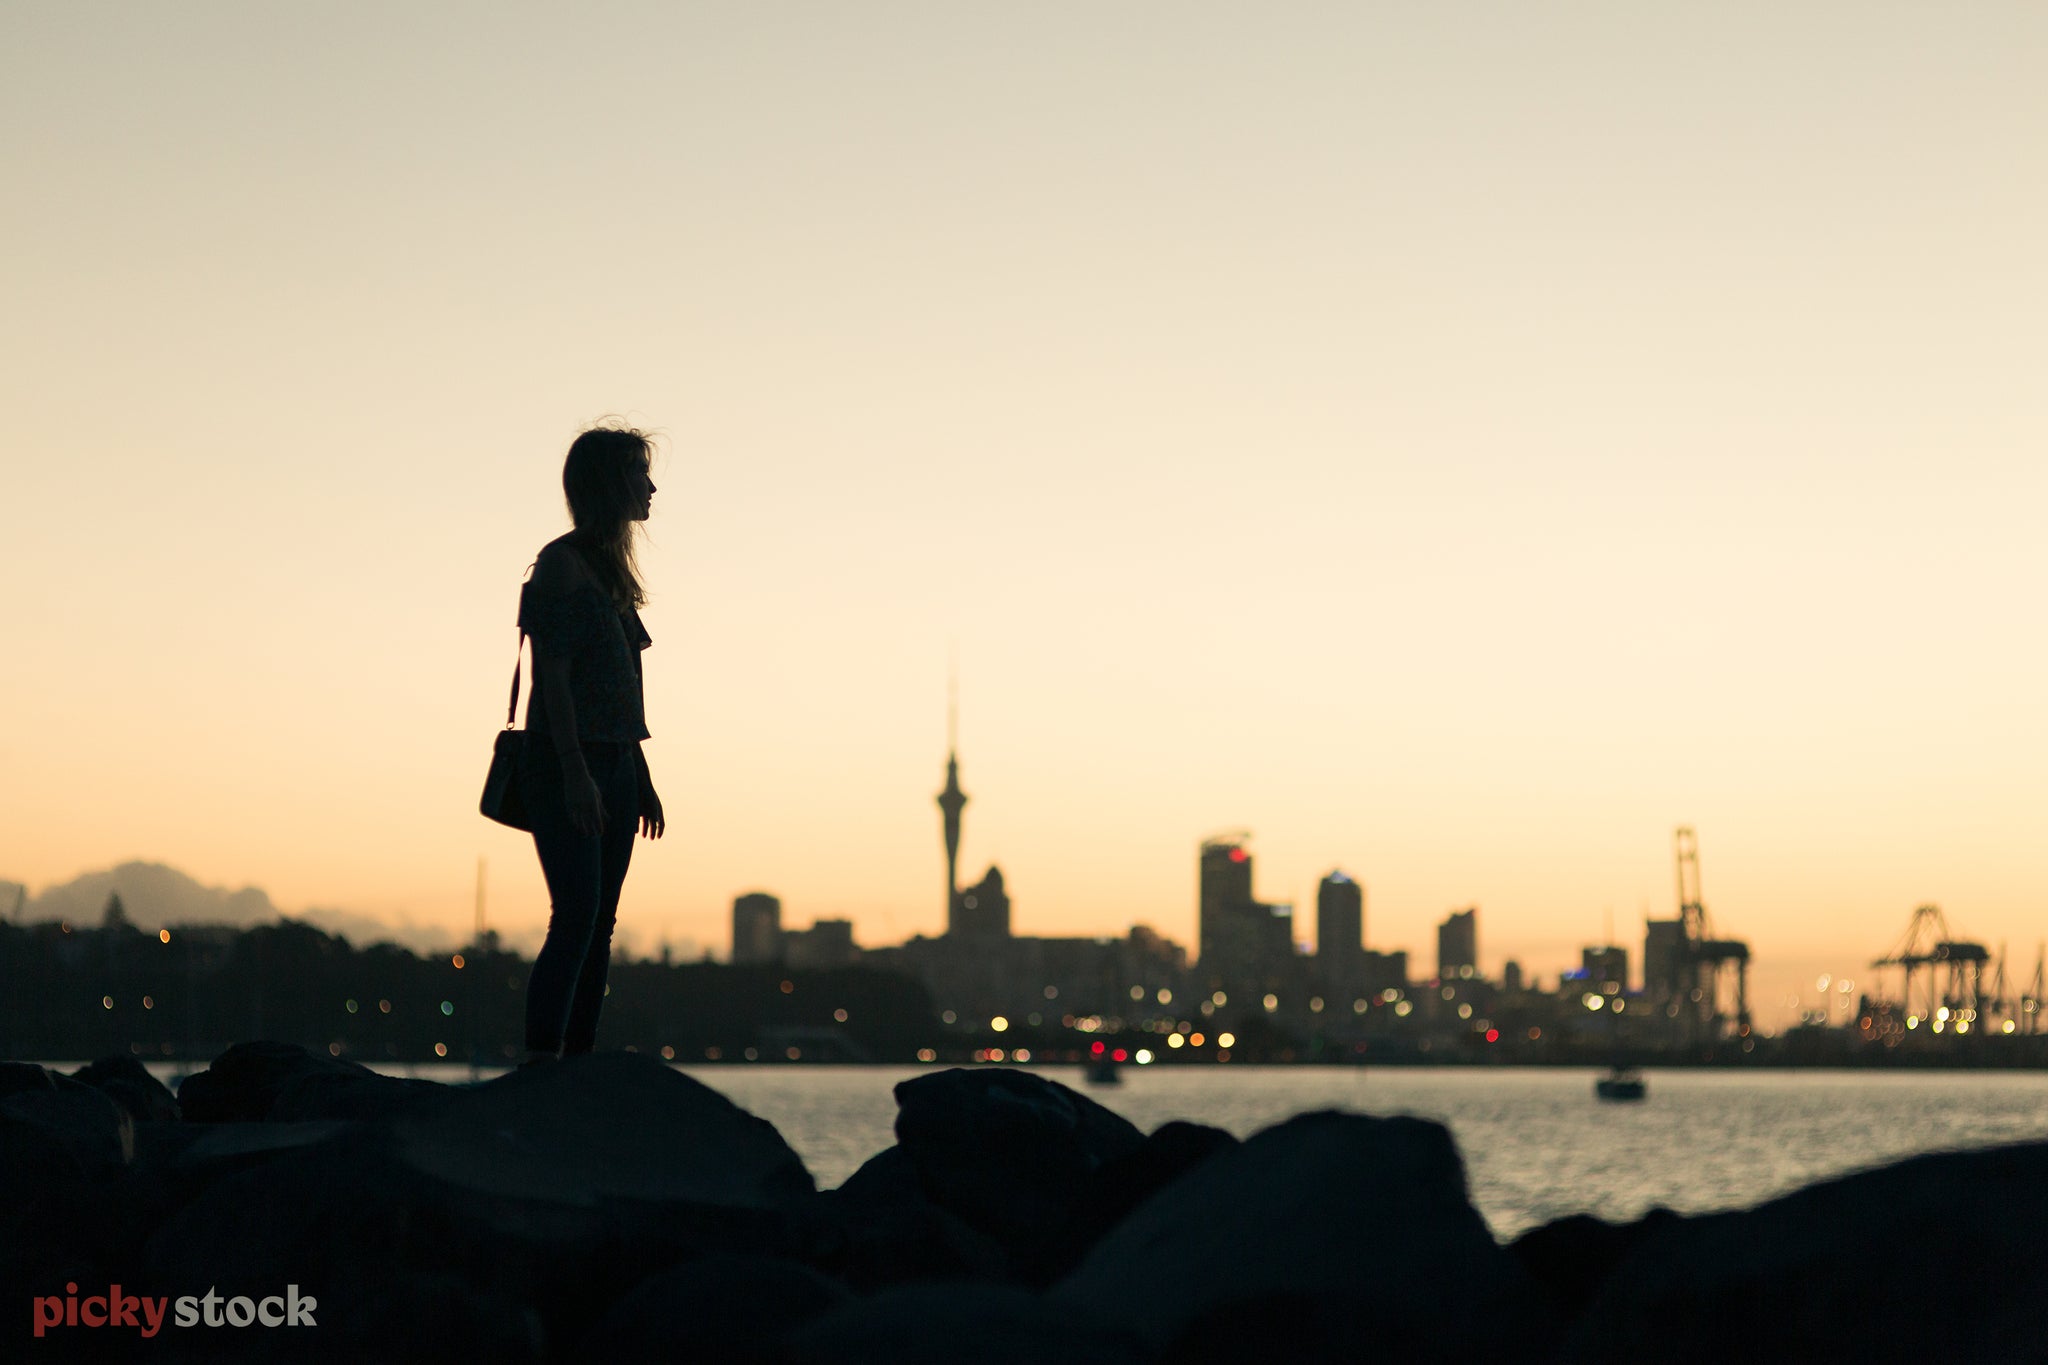 Silhouette of young female standing on rocks, in front of Auckland city. The light is dusk-like, and the city lights are just turned on. 